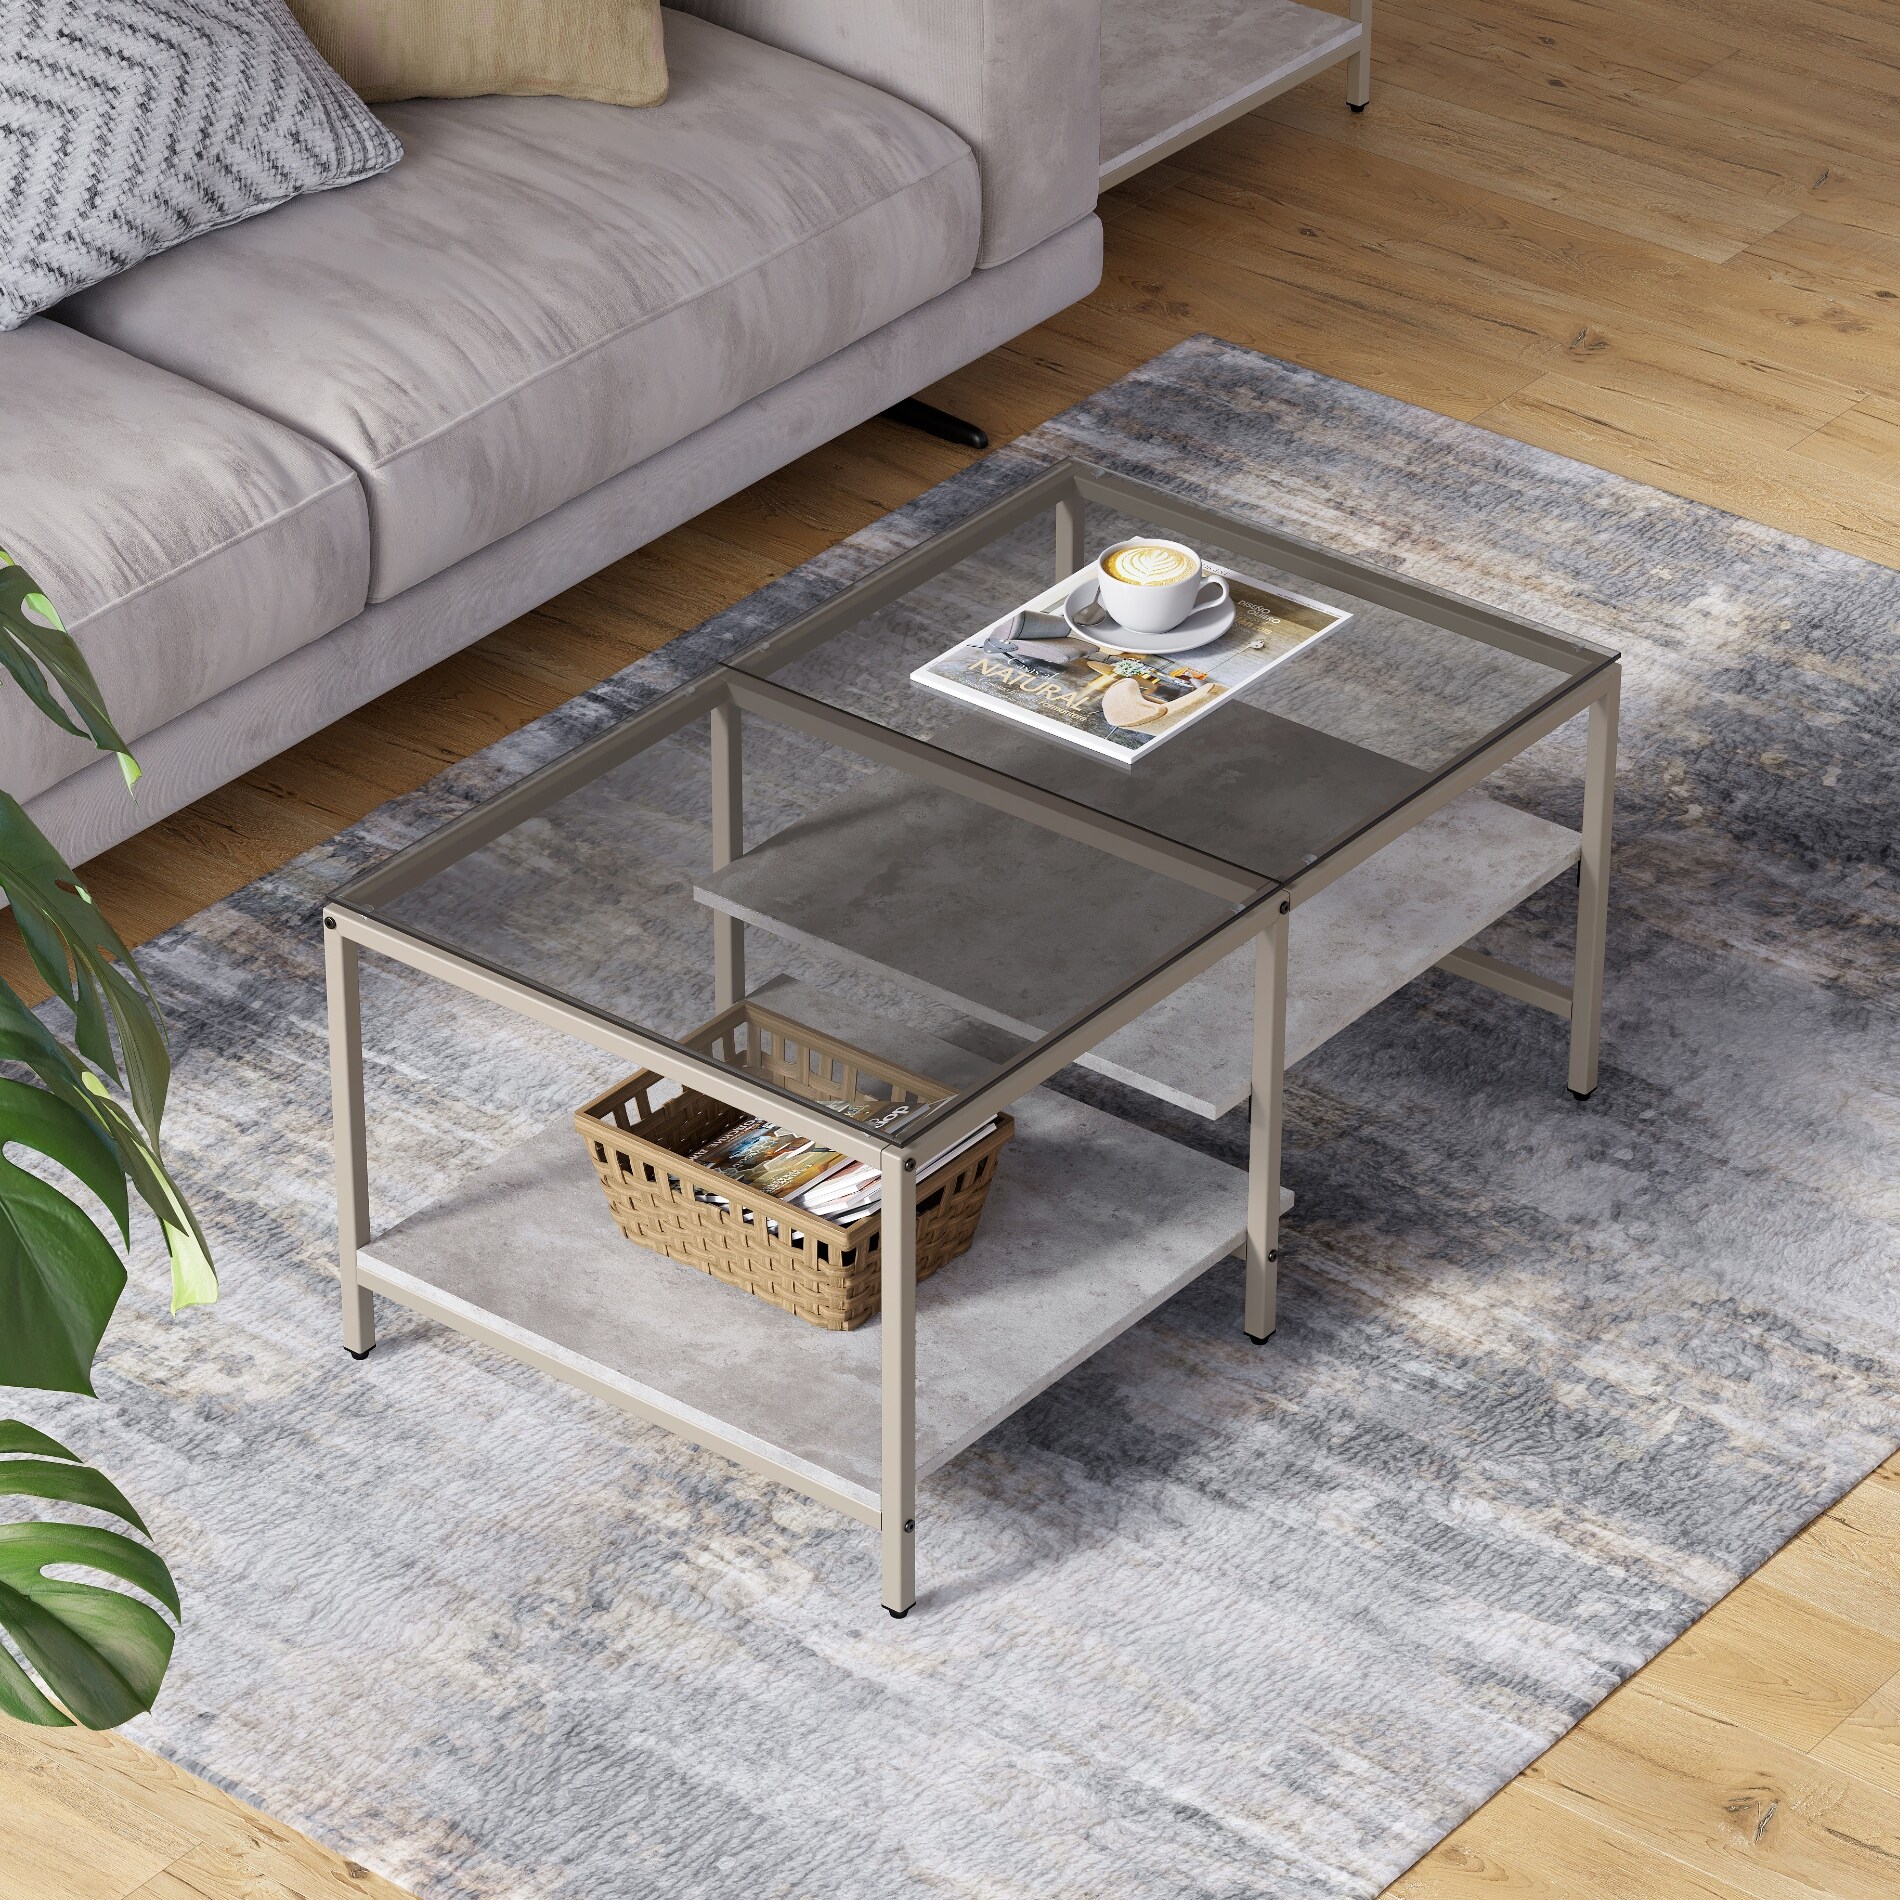 Rectangle Metal Wood Center Tables with Grey Tempered Glass Top HOMOOI Glass Coffee Table with 2-Tier Wood Storage Shelves for Small Spaces 40 Walnut